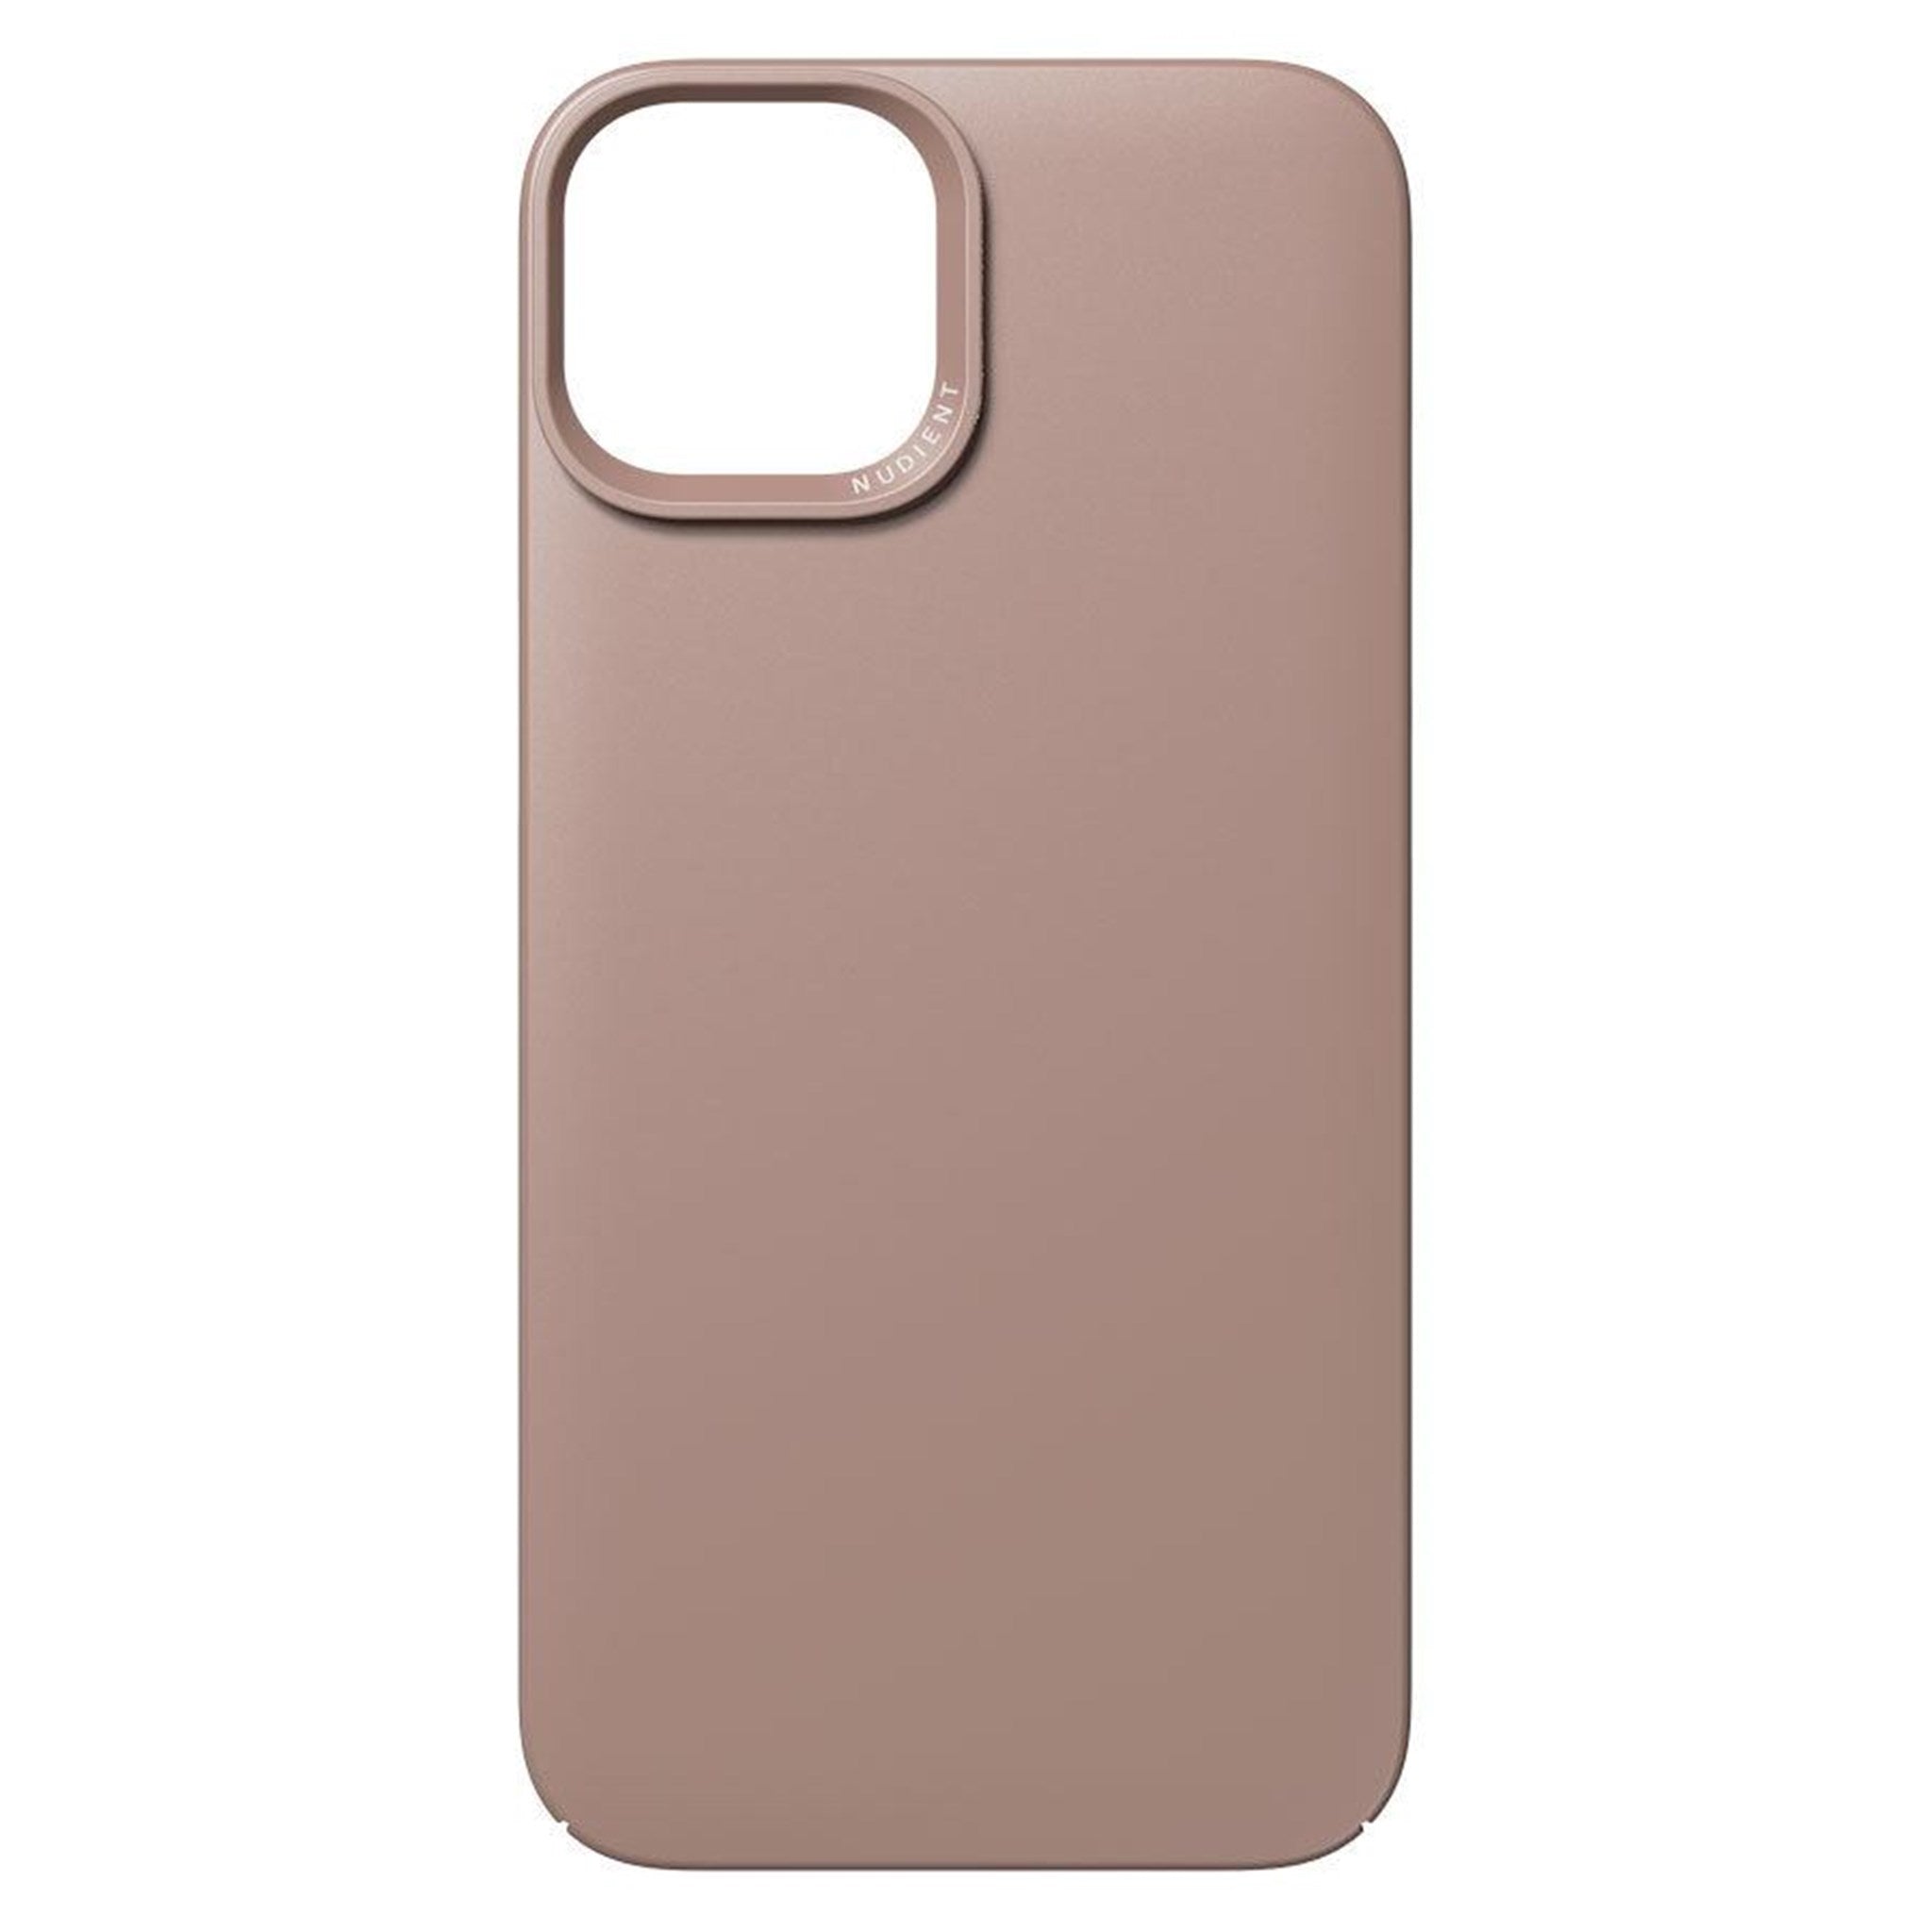 00-000-0054-0006_Nudient-iPhone-14-Pro-Max-Thin-Cover-Dusty-Pink_01.jpg